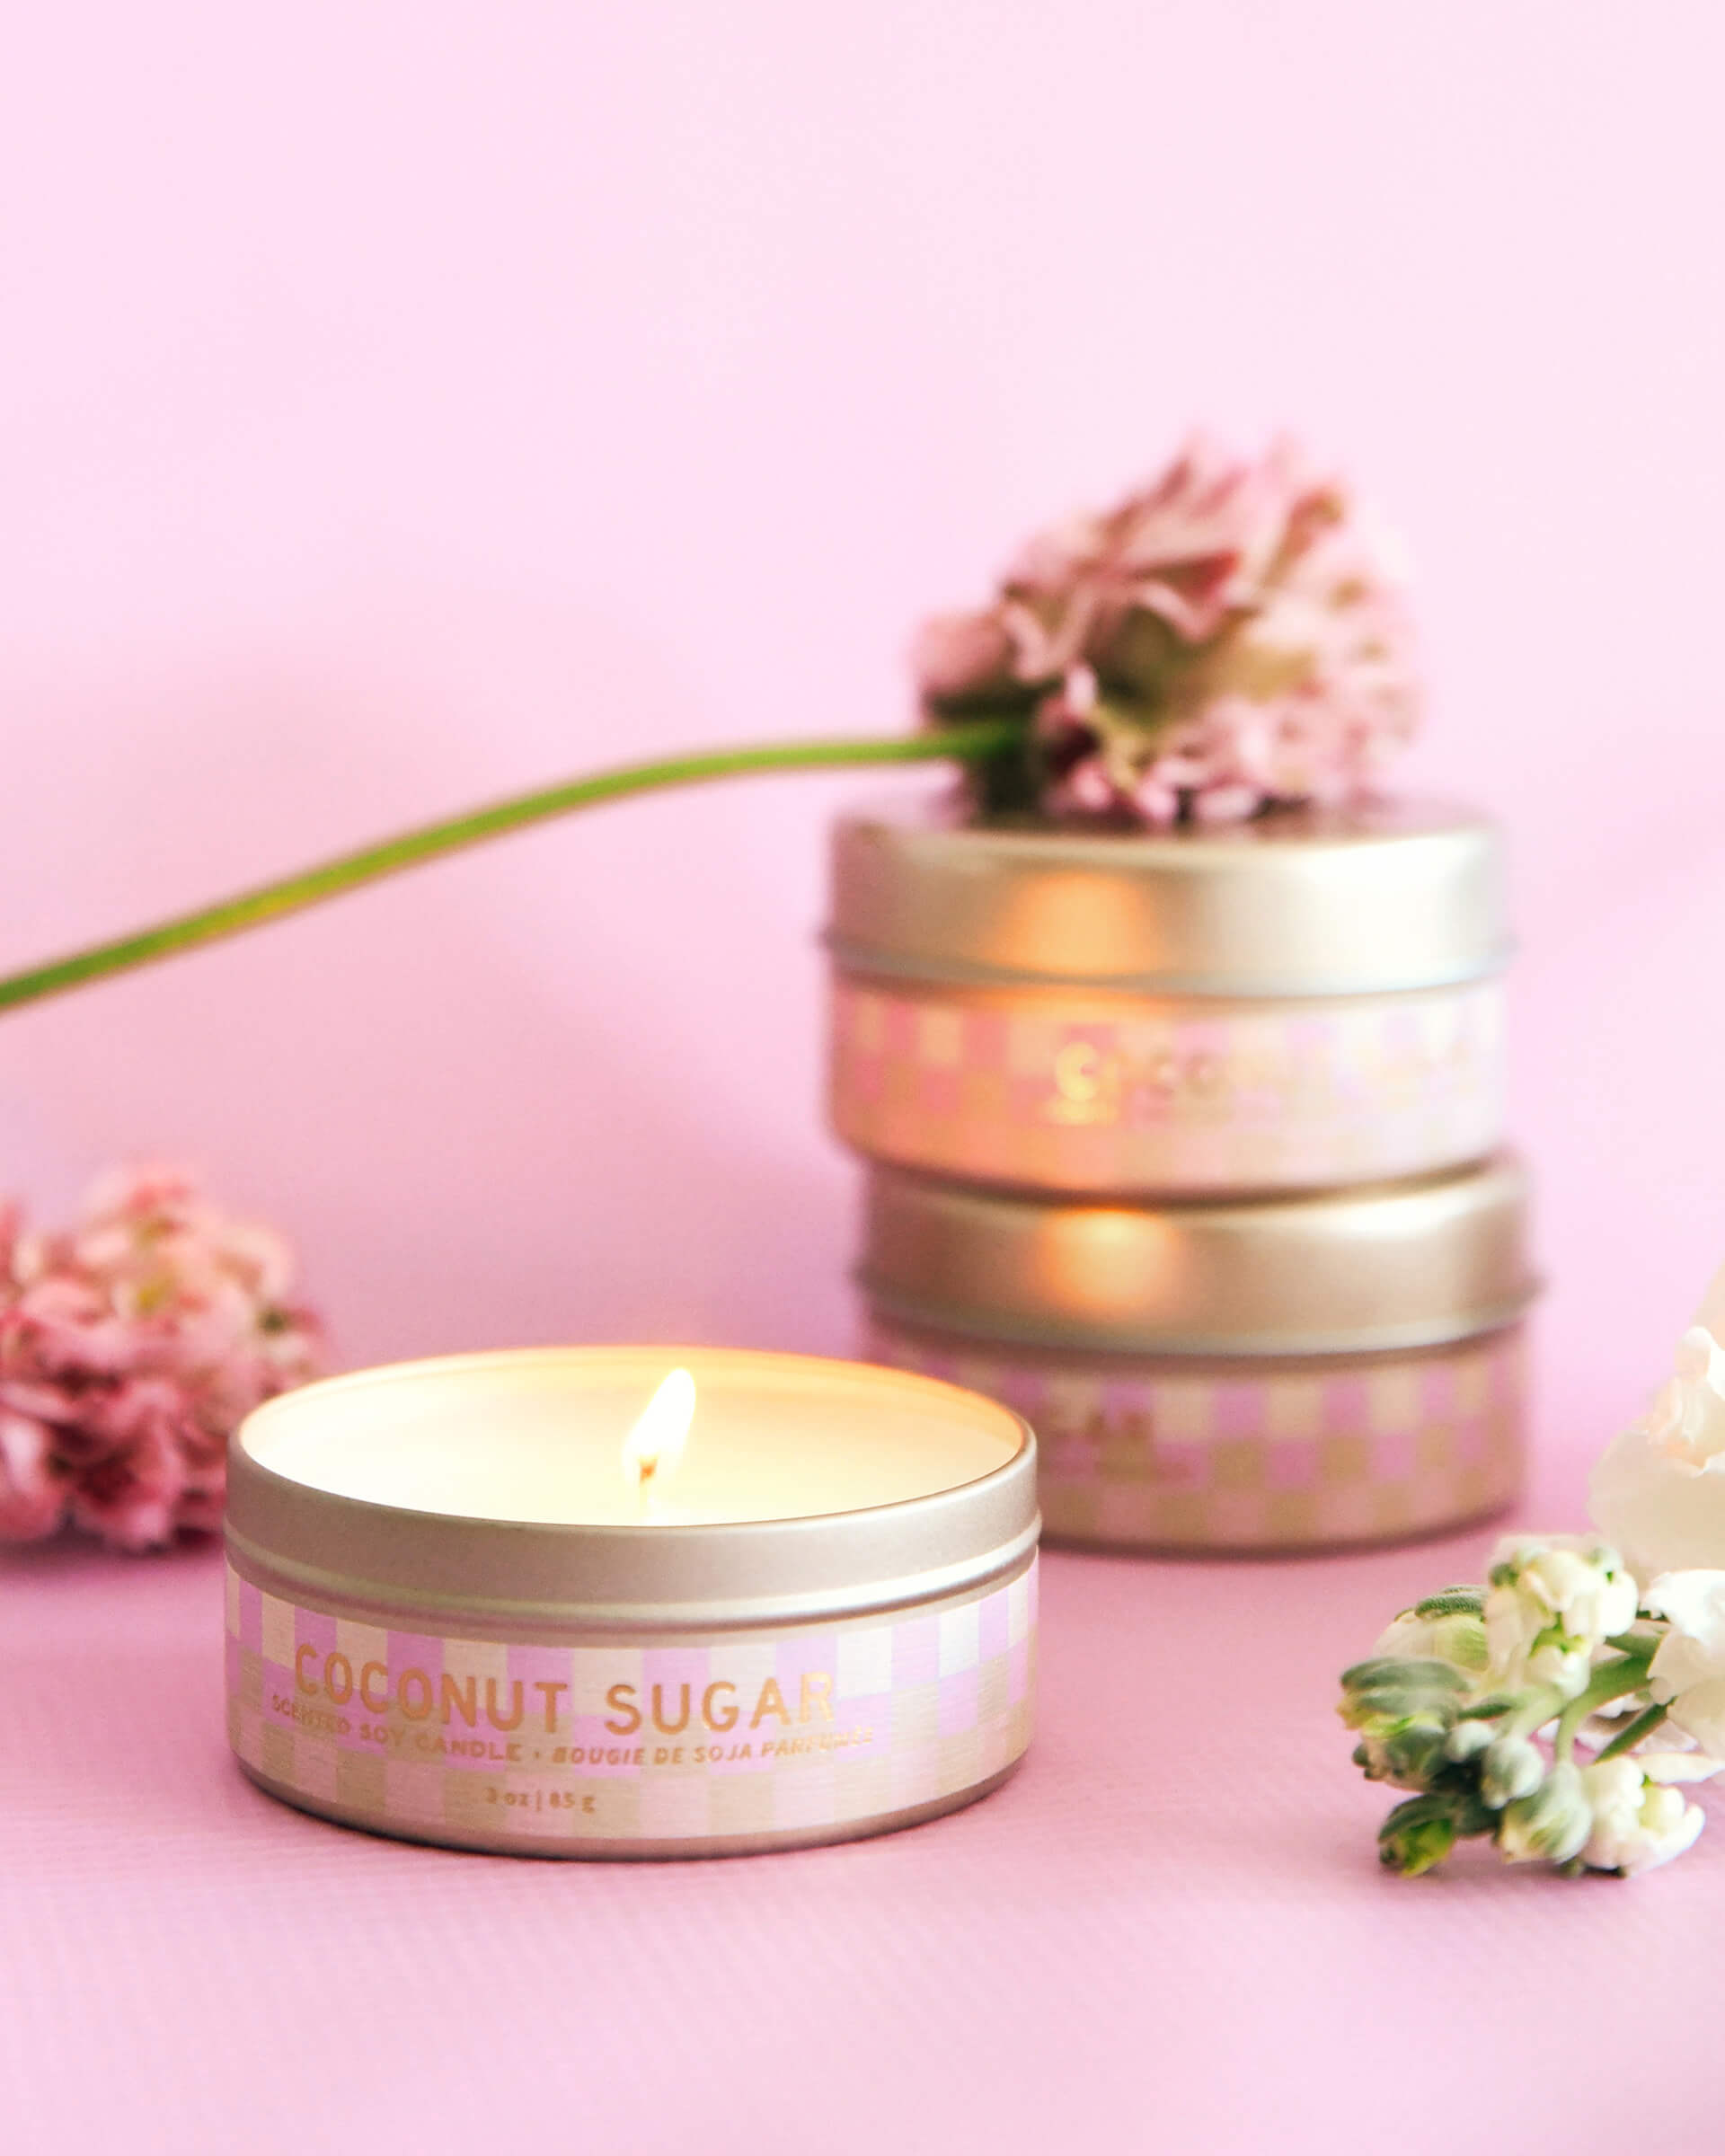 pink and white check 3 oz tin coconut sugar lit candle surrounded with flowers on pink background